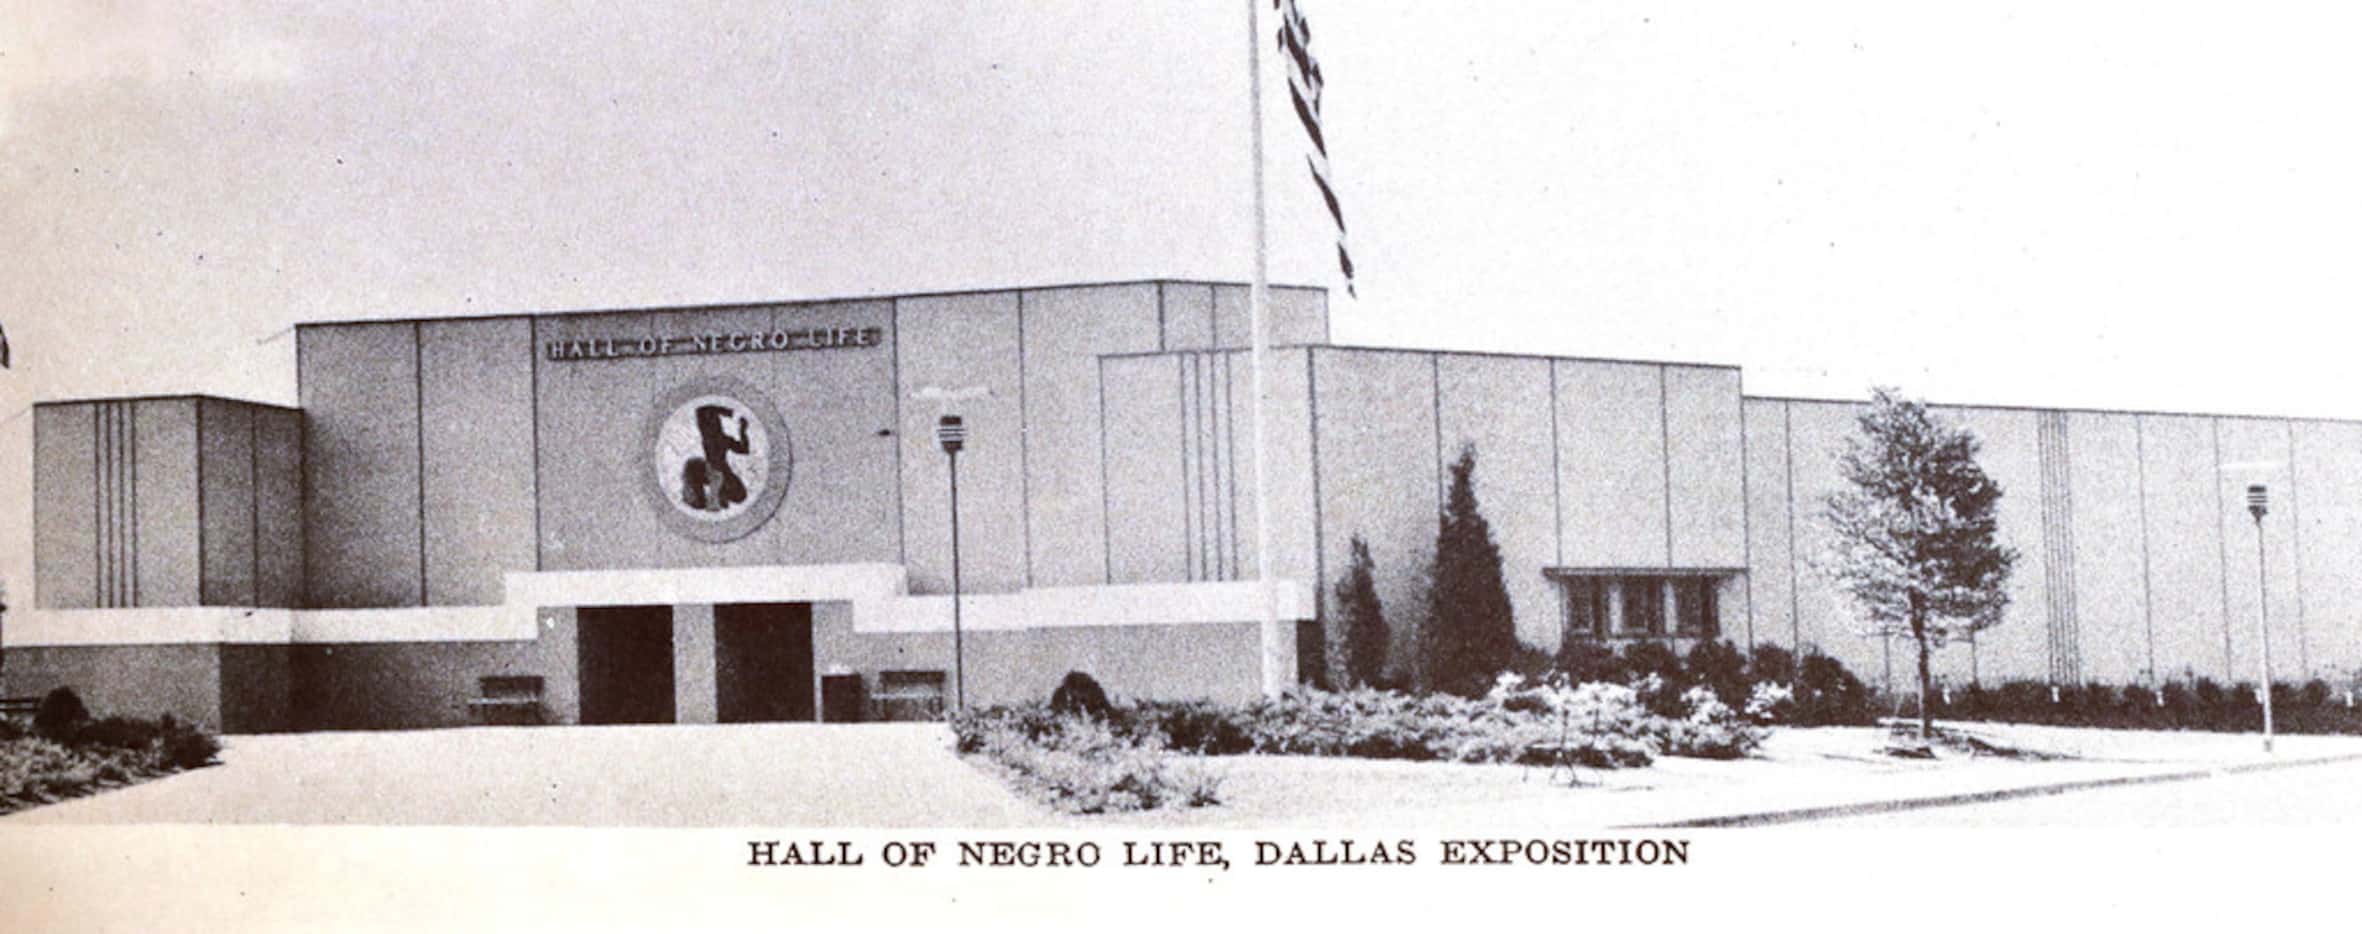 The Hall of Negro Life, which didn't survive one year at Fair Park